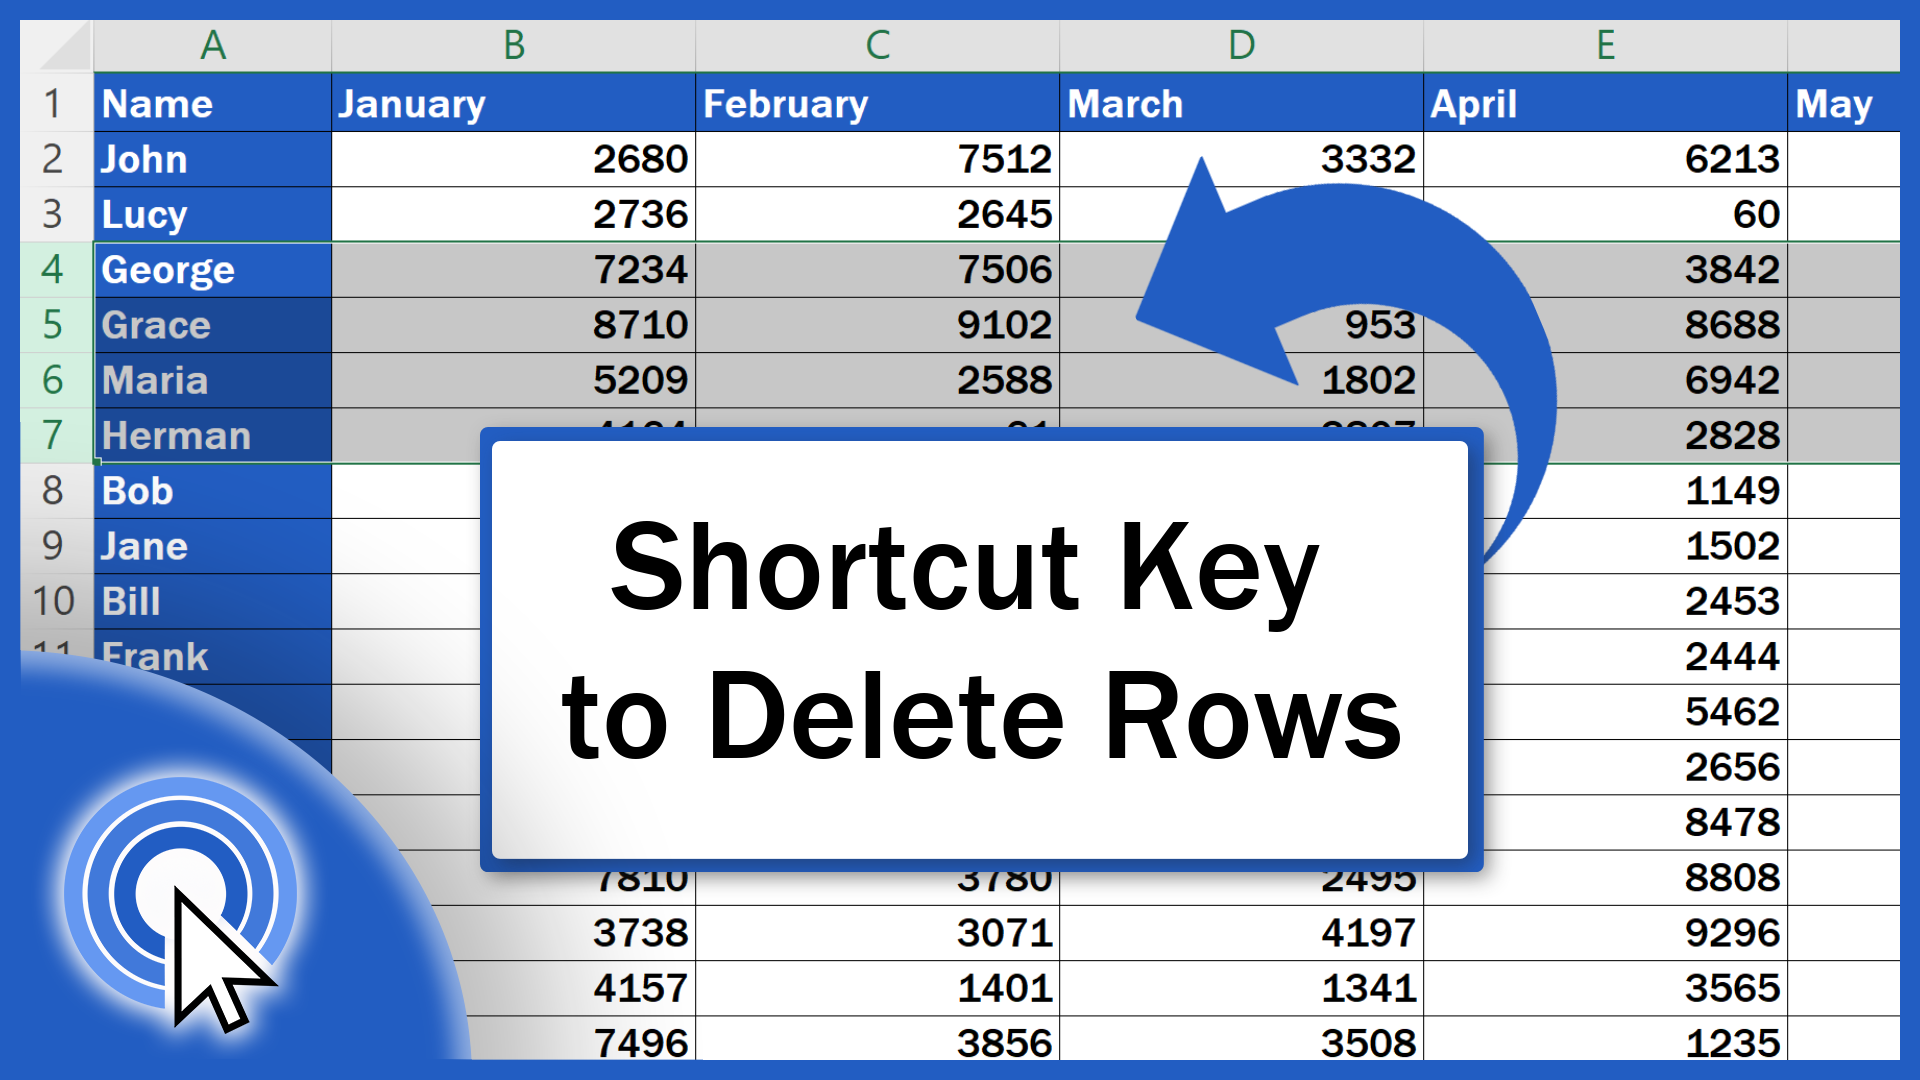 Shortcut Key to Delete Rows in Exce